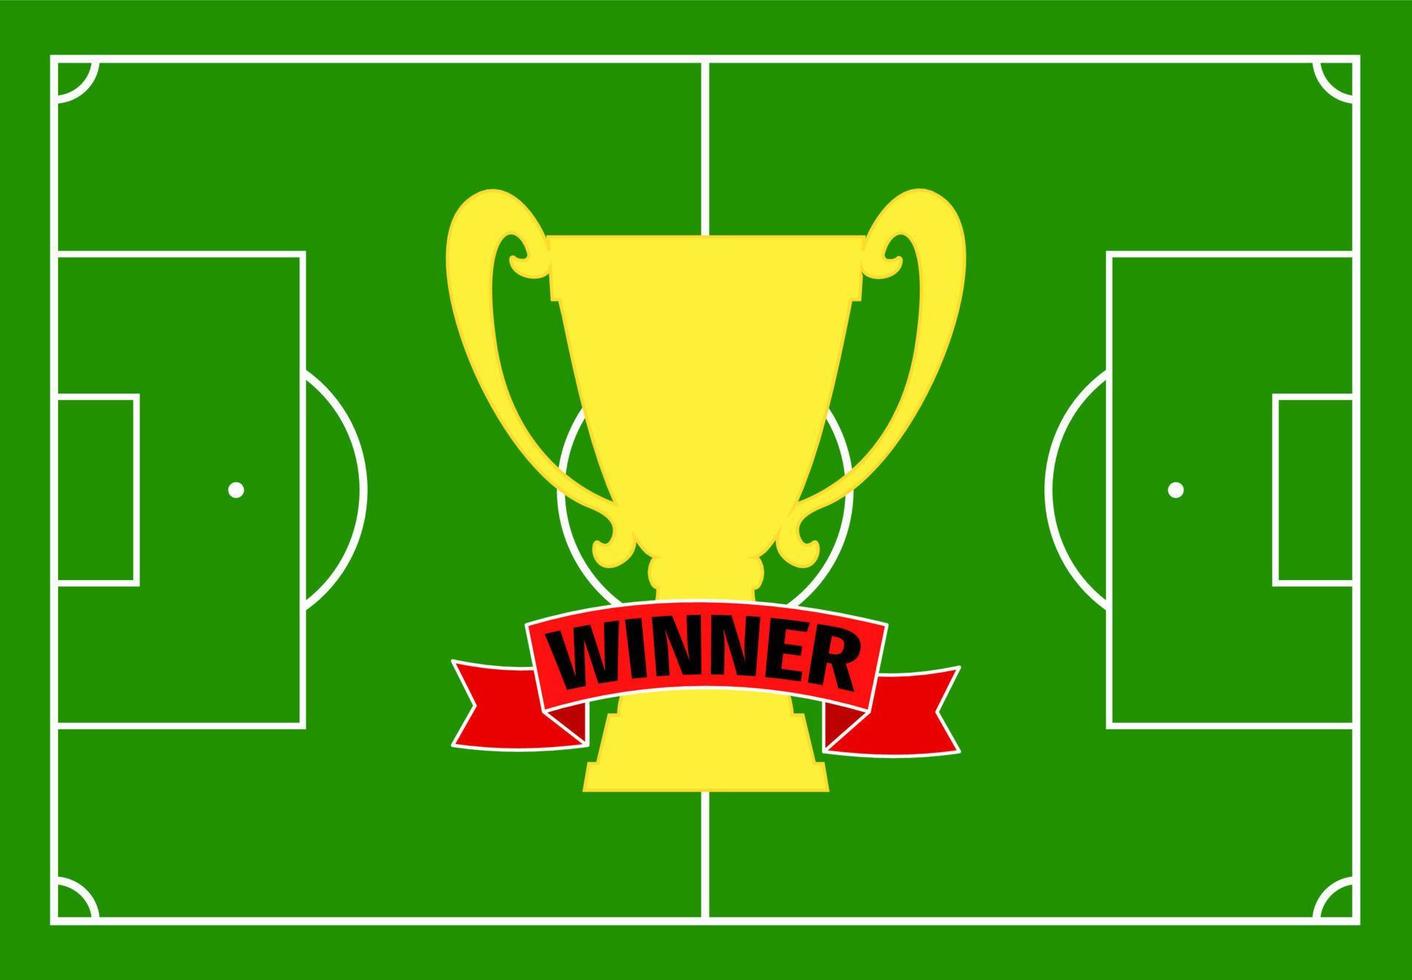 Football field with green grass and with a gold cup with a red ribbon. Vector illustration